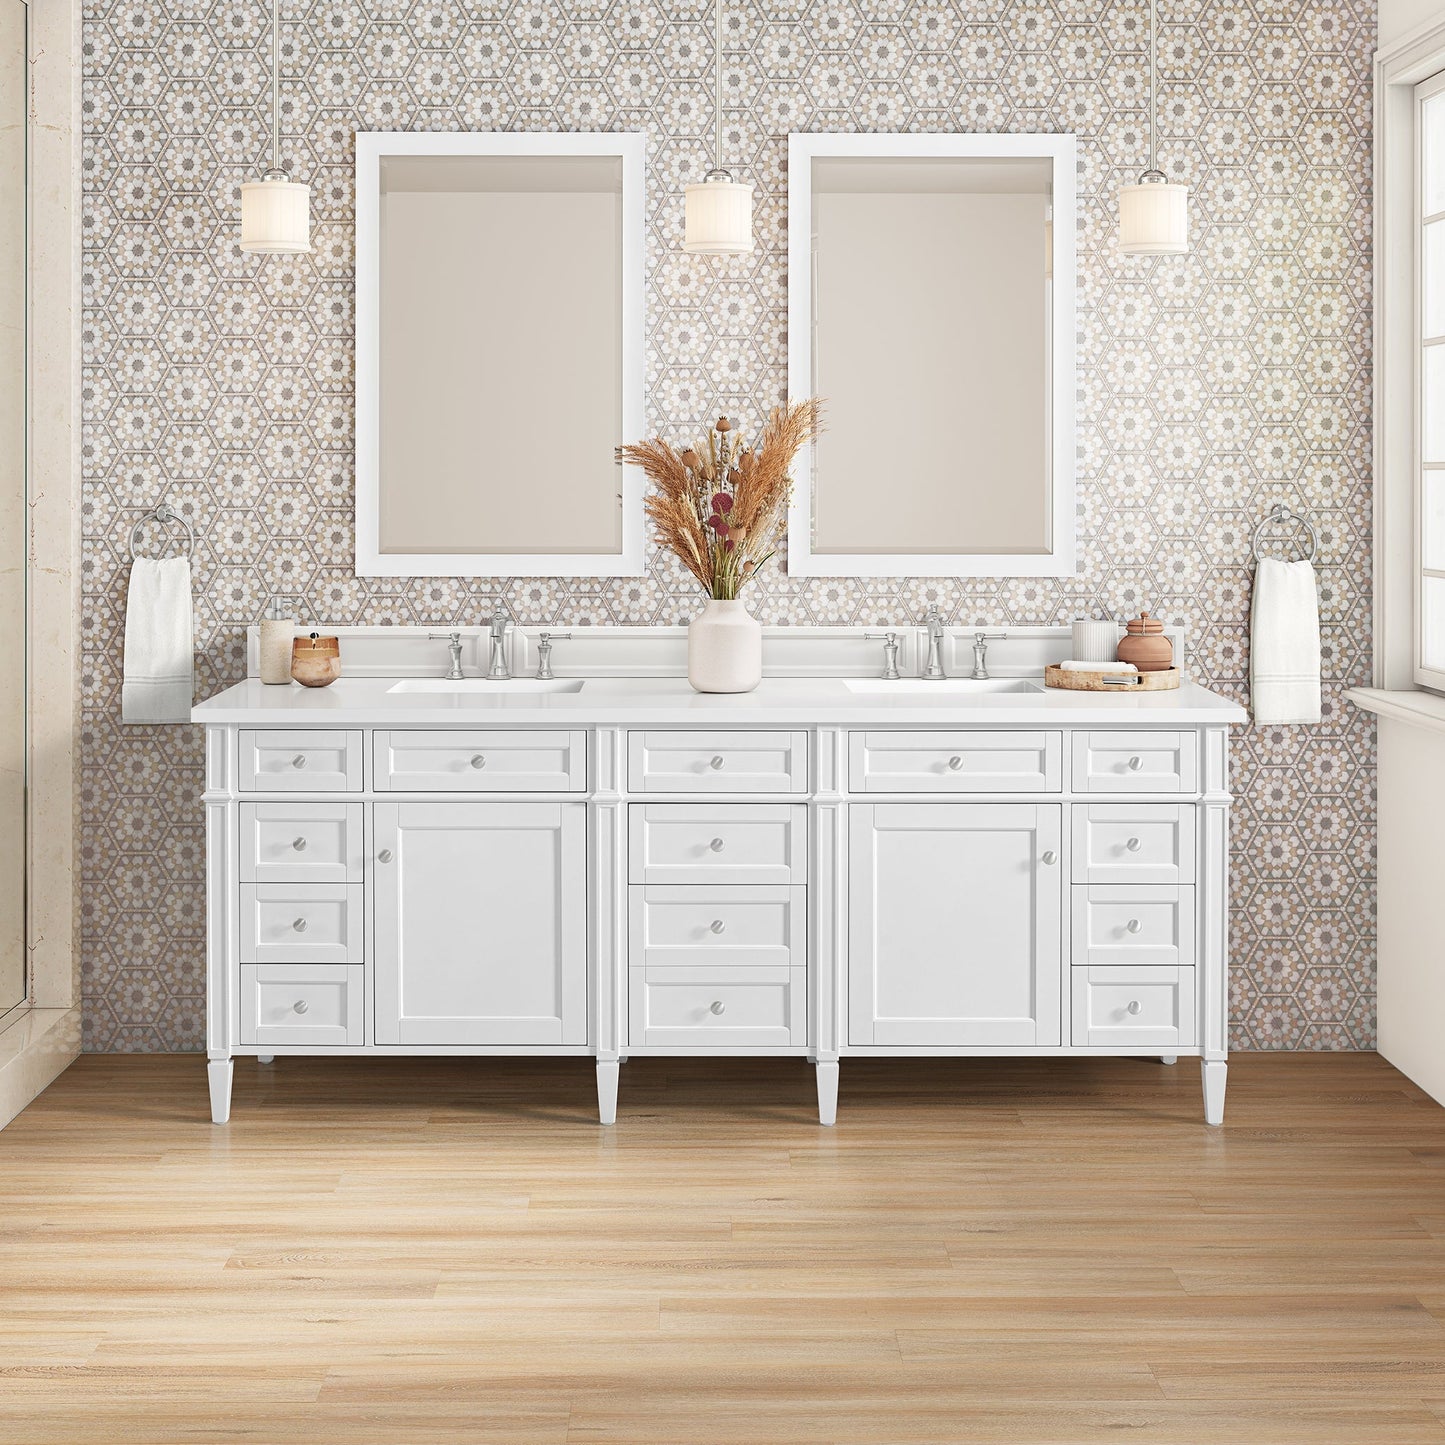 Brittany 84" Double Bathroom Vanity in Bright White Double bathroom Vanity James Martin Vanities 